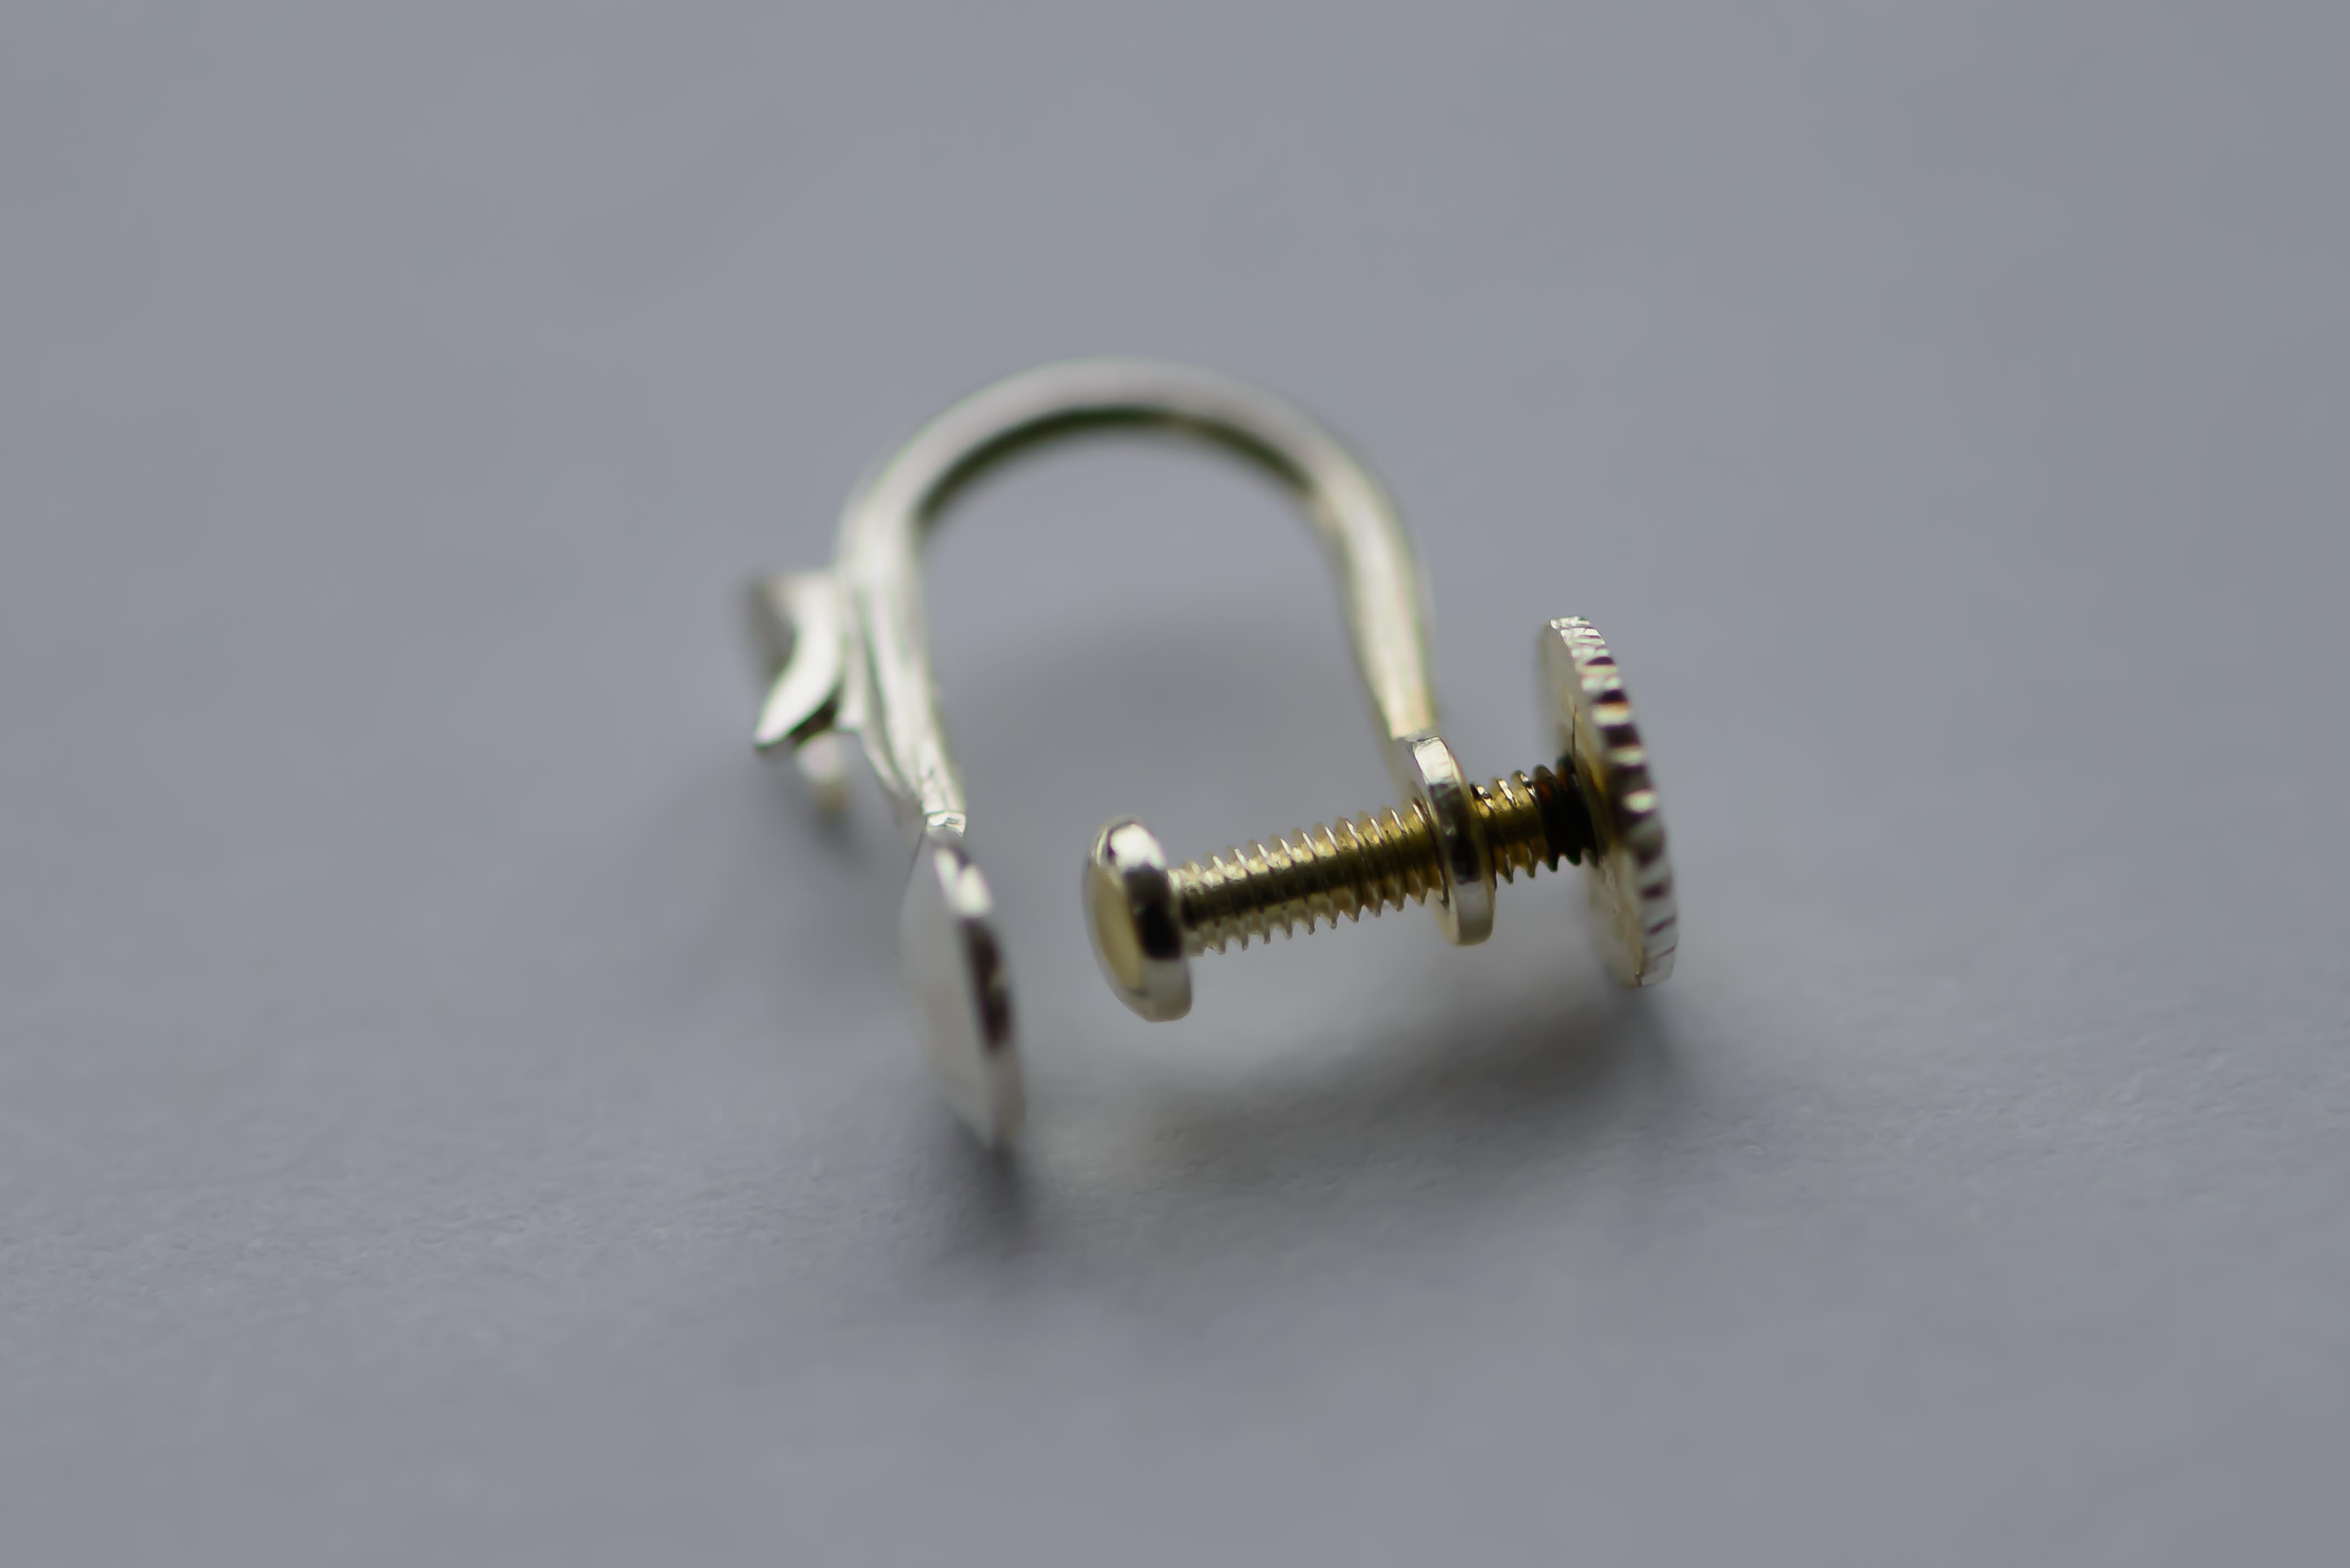 Adaptor rings for non pierced ears (gold/silver)